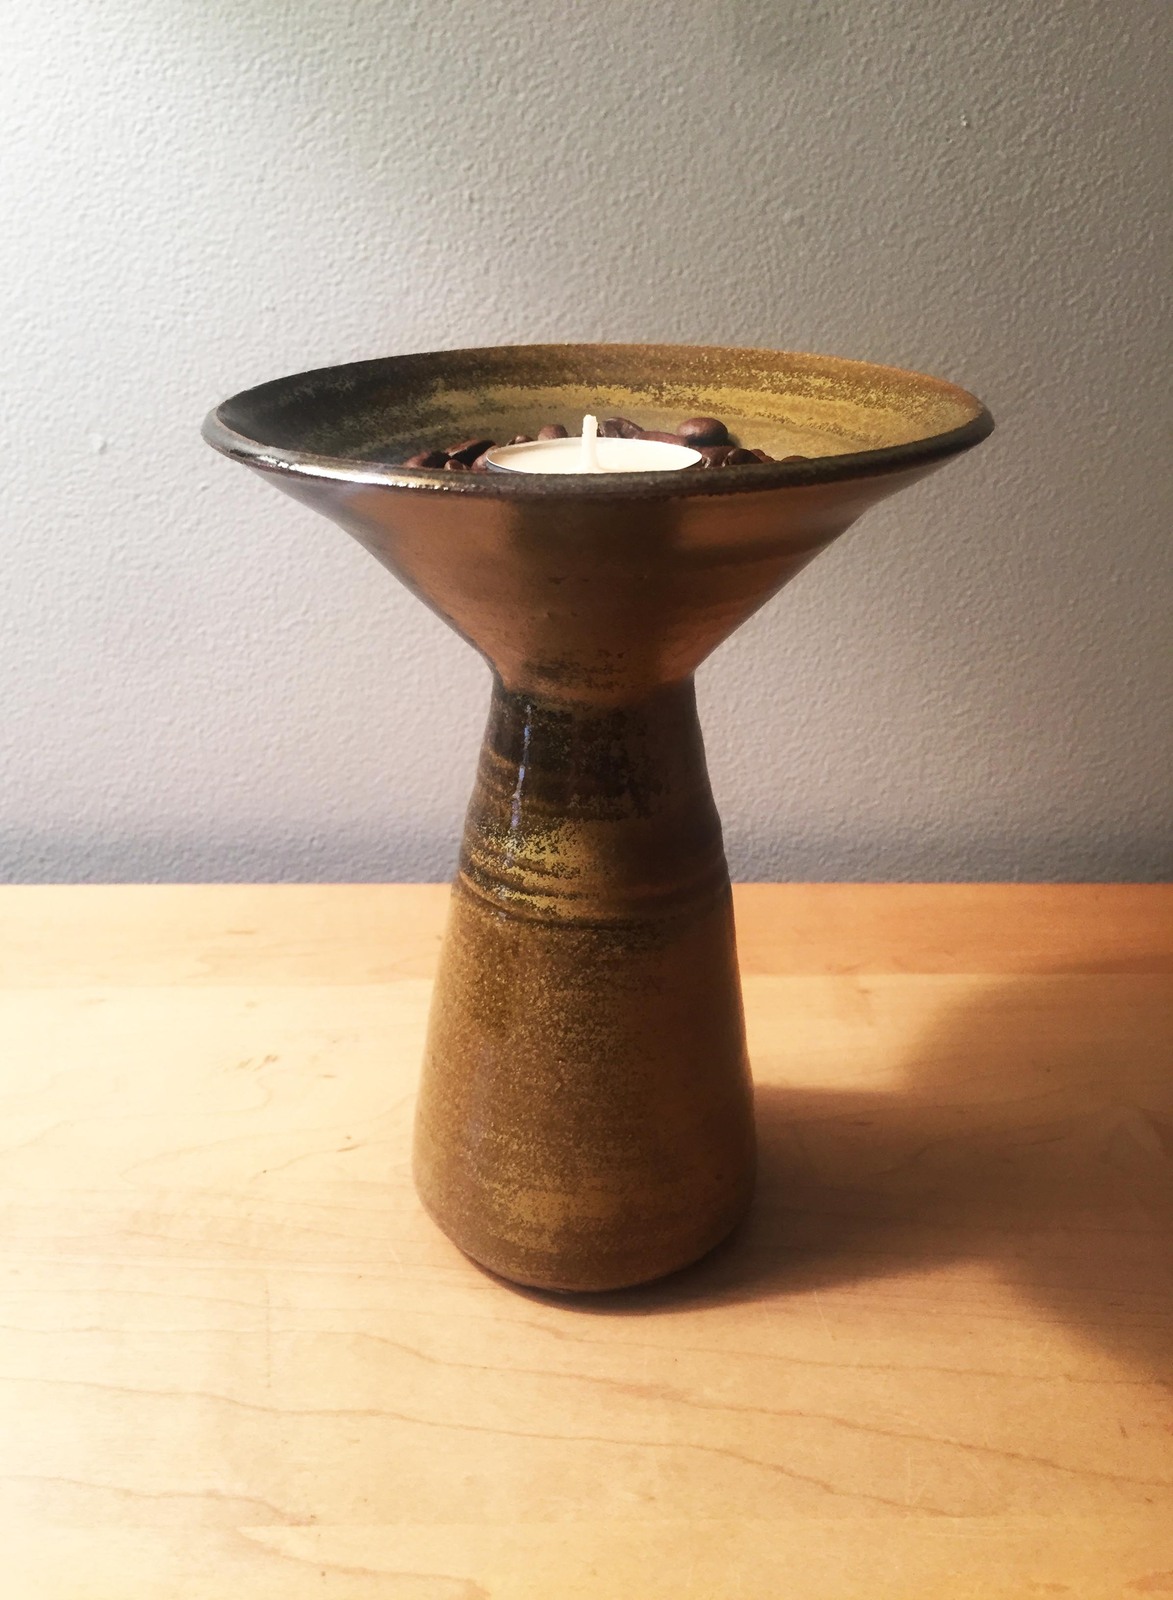 Primary image for Artisan Pottery: Stoneware Goblet Candle Holder (JD03)